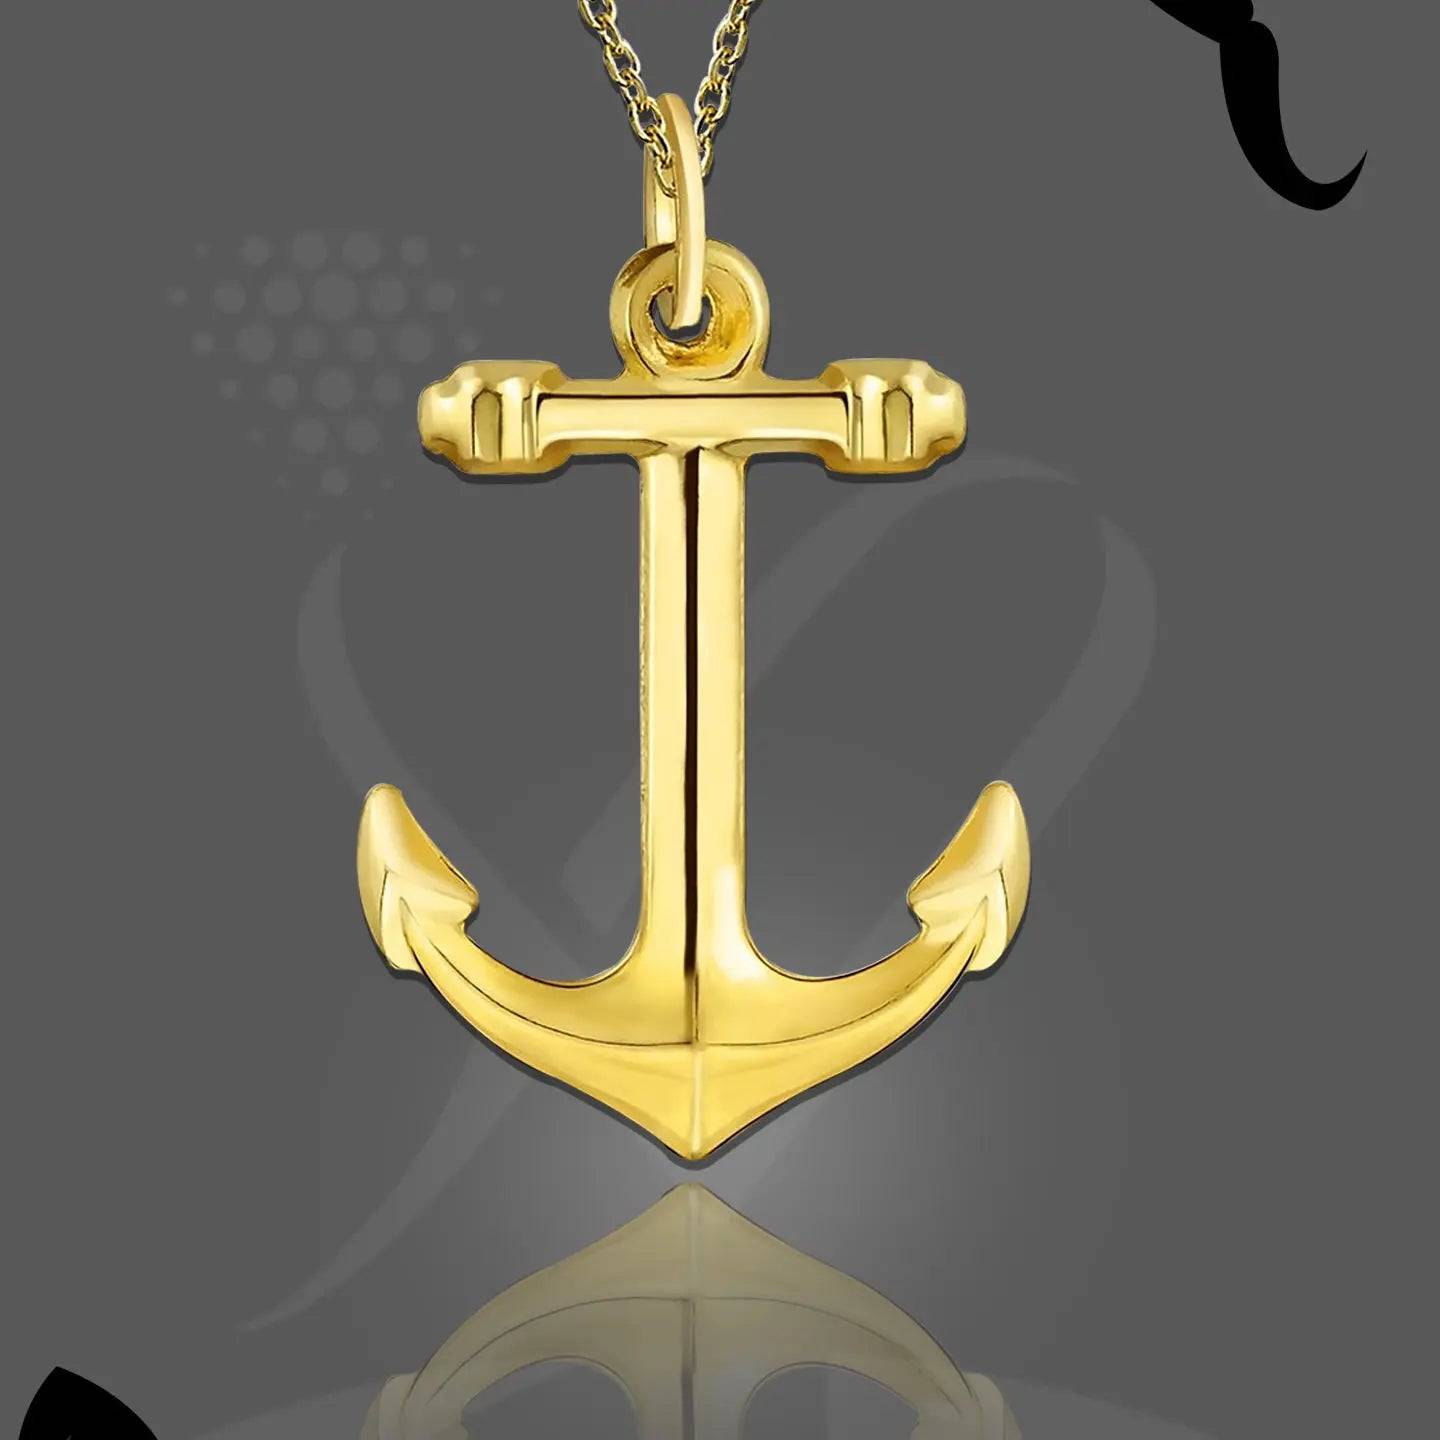 Sterling Silver Anchor Necklace - Baza Boutique 